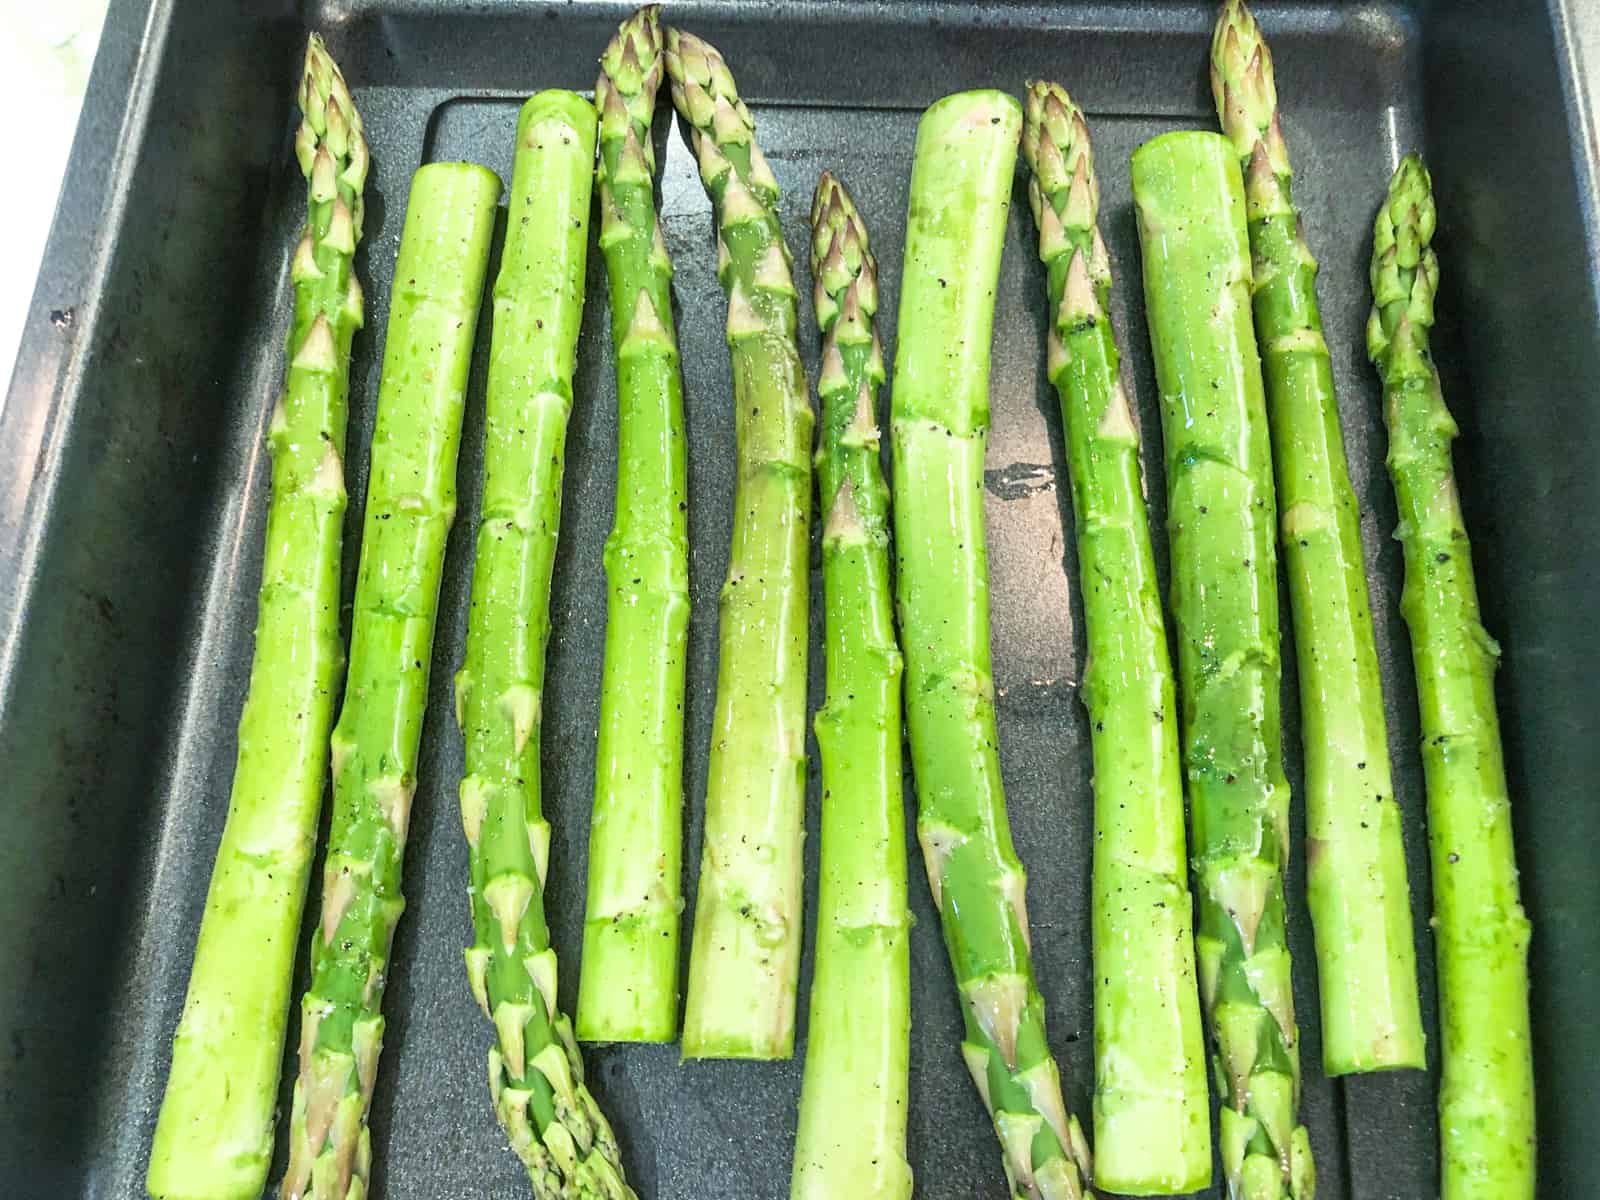 Asparagus spears on a baking tray about to be roasted.